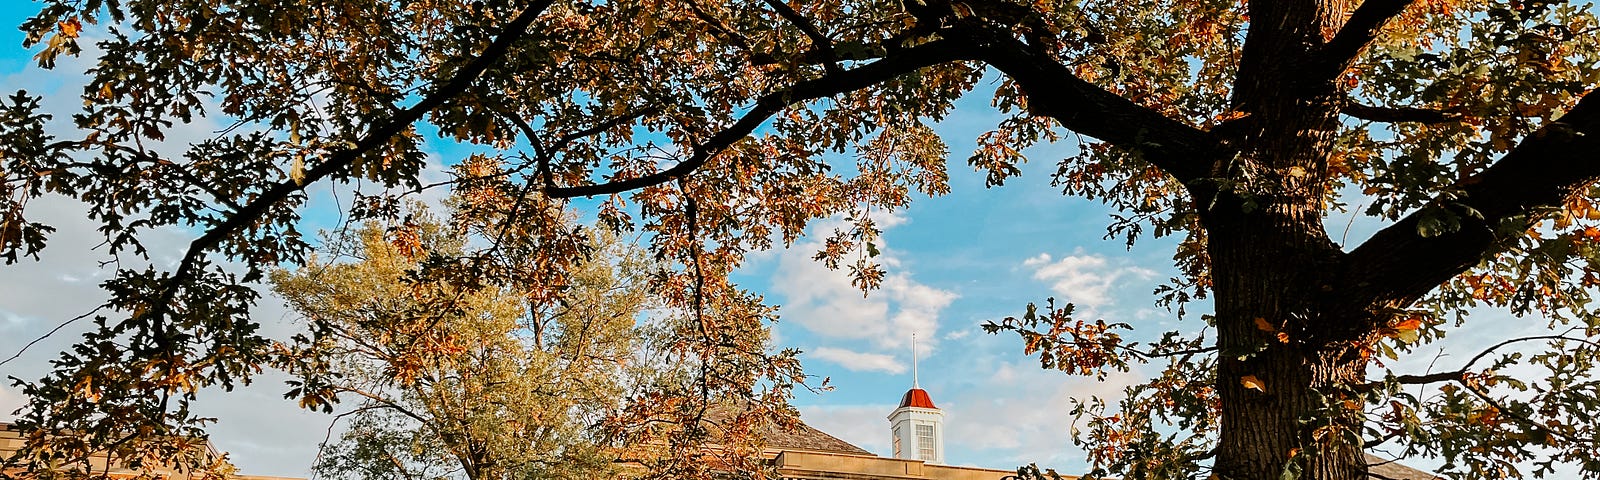 The rising sun shines on fall trees as Love Library peeks out between branches